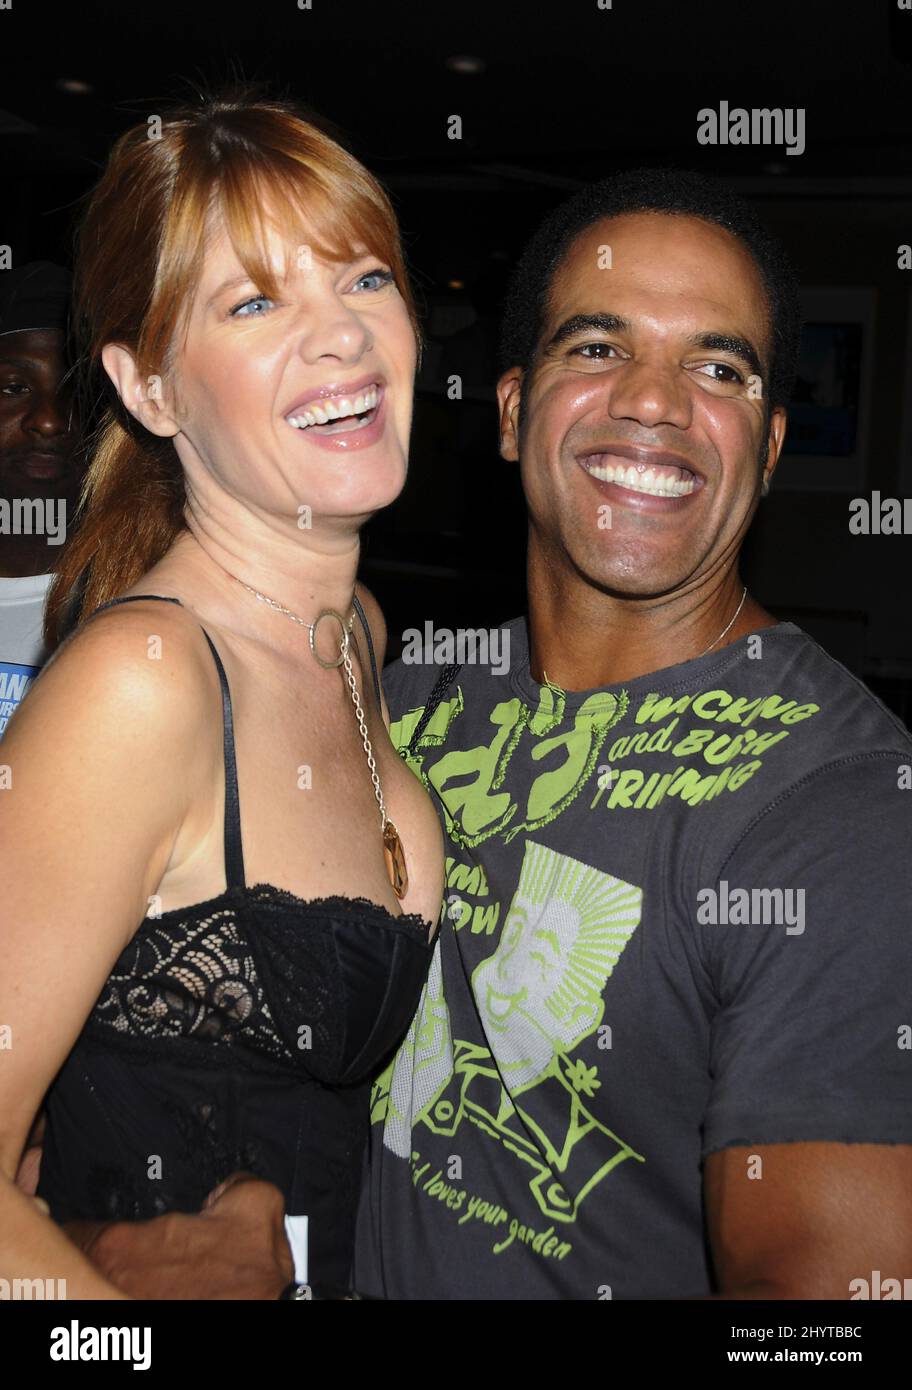 Michelle Stafford and Kristoff St. John arrives at Soaps in the City kick-off fundraiser for AIDS Walk LA, at East/West Lounge, Los Angeles. Stock Photo